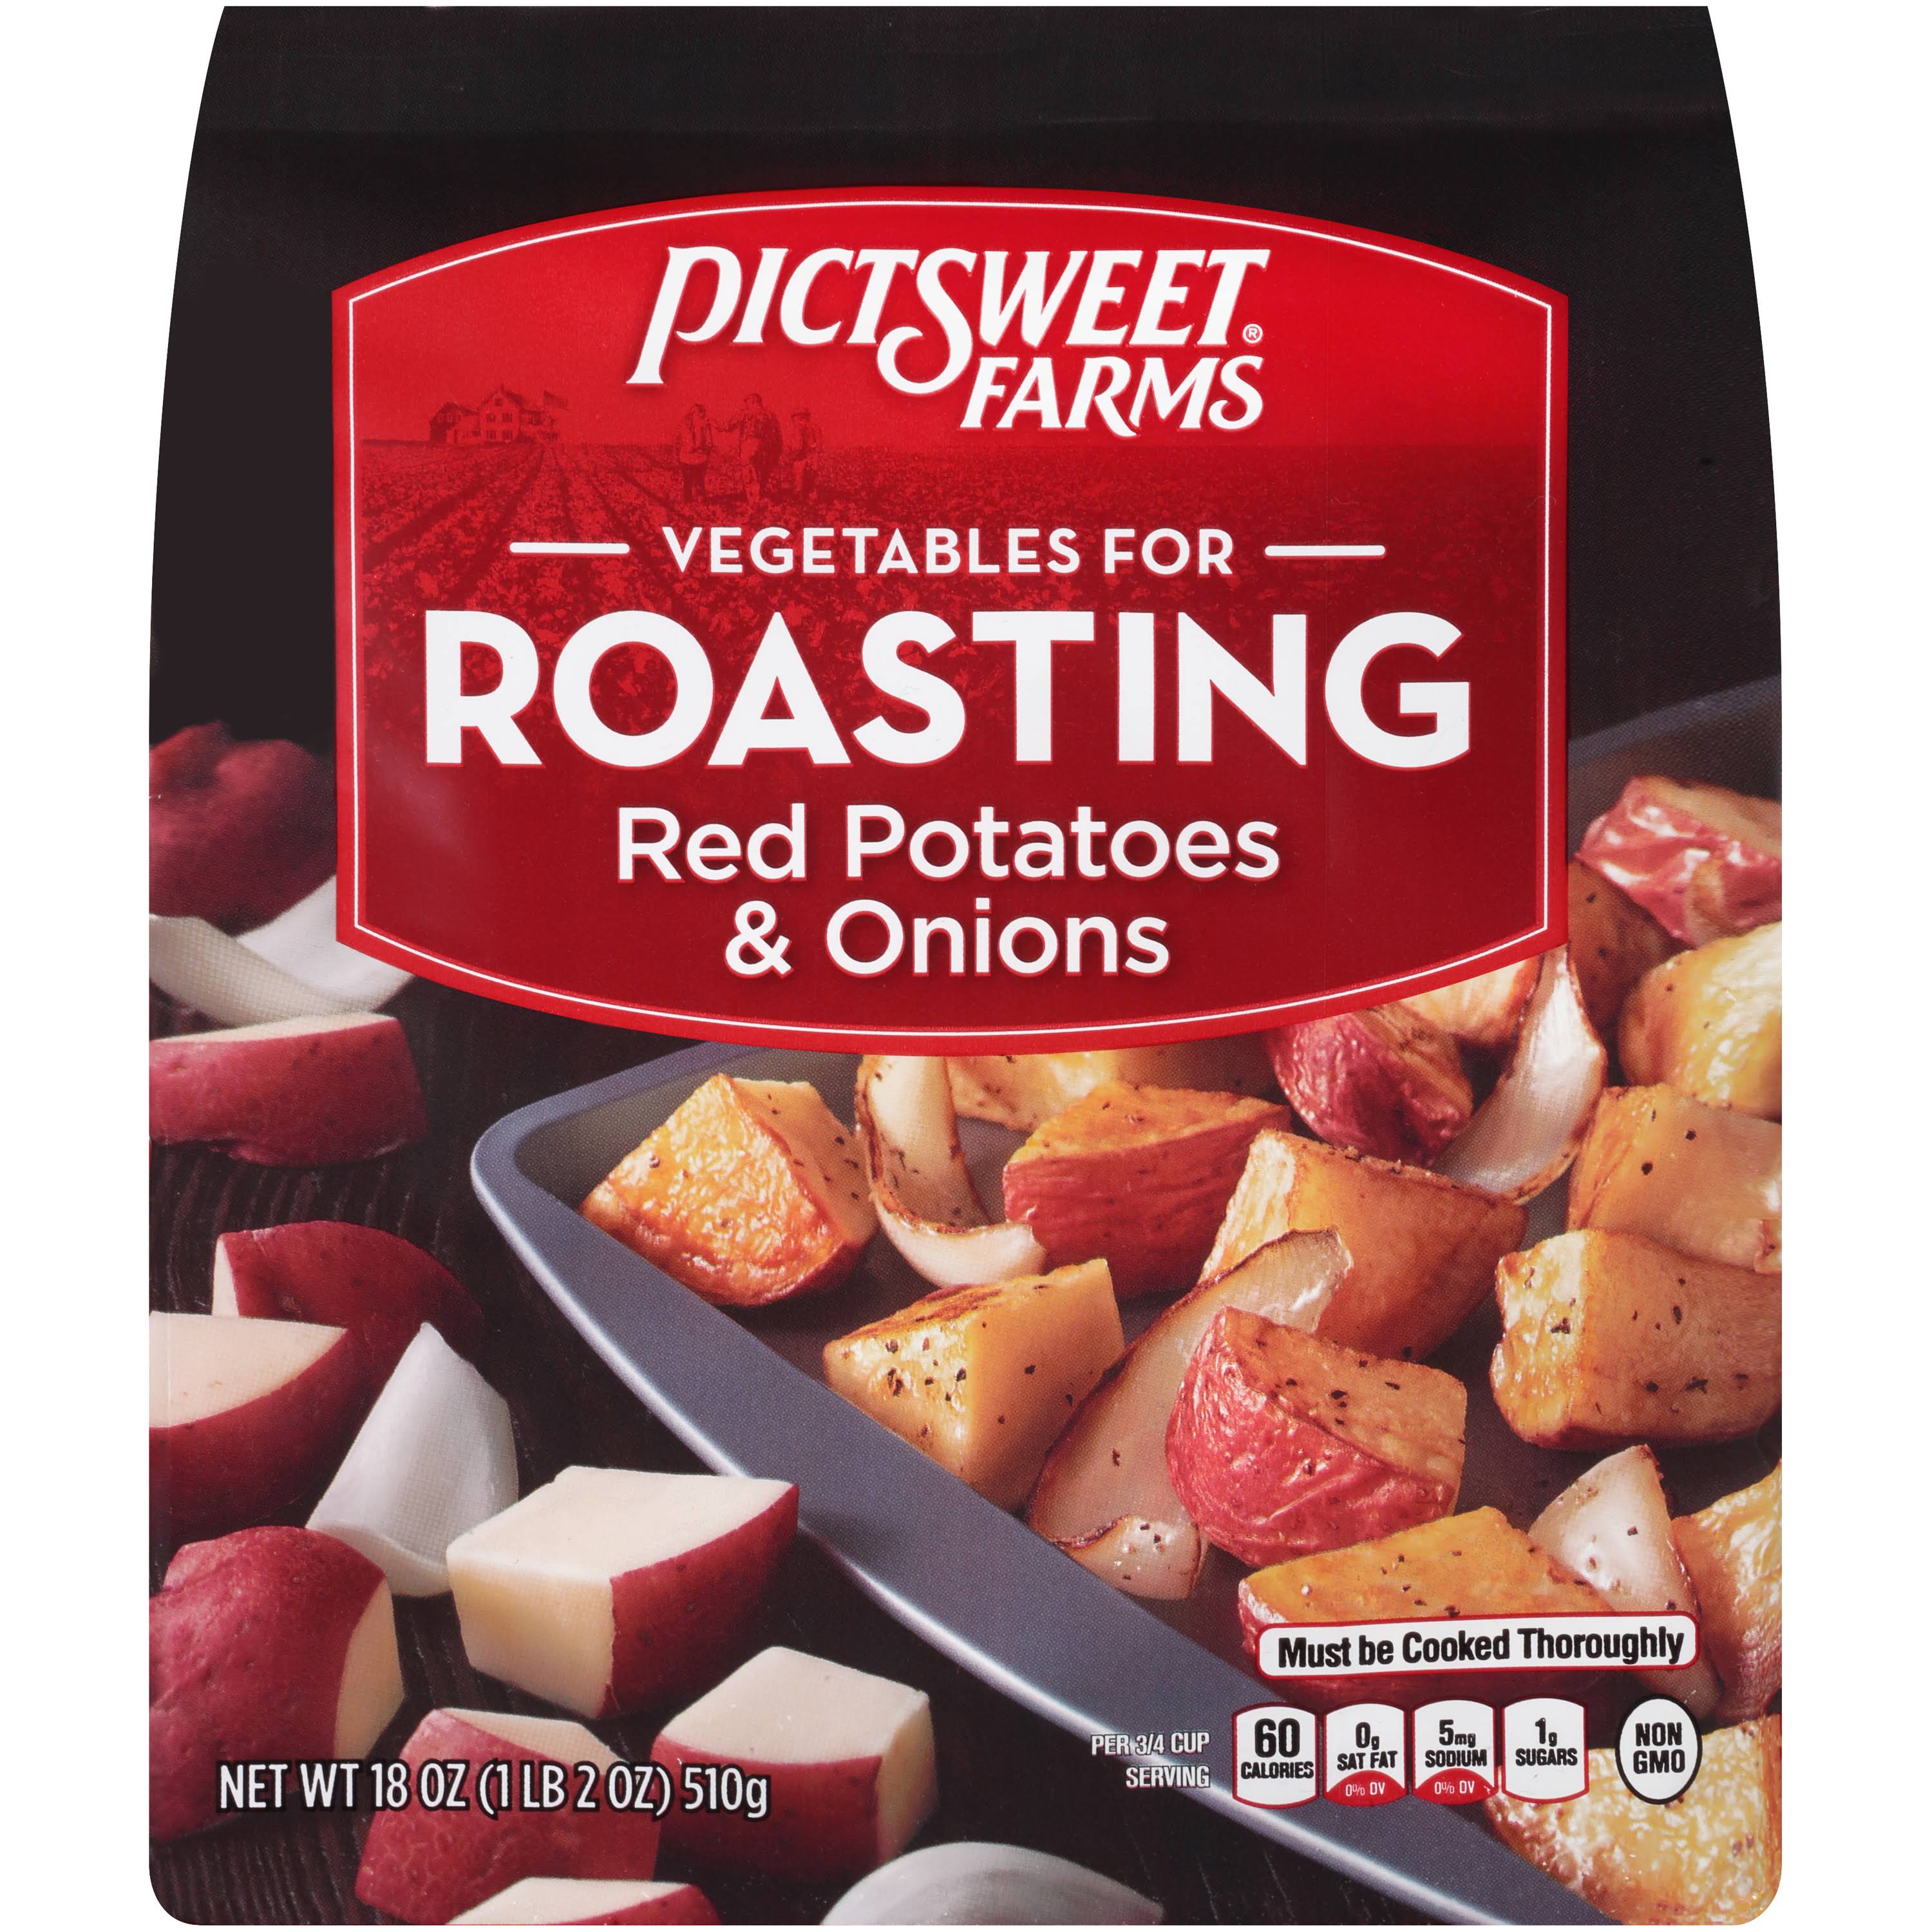 Pictsweet Farms Vegetables for Roasting, Red Potatoes & Onions - 18 oz